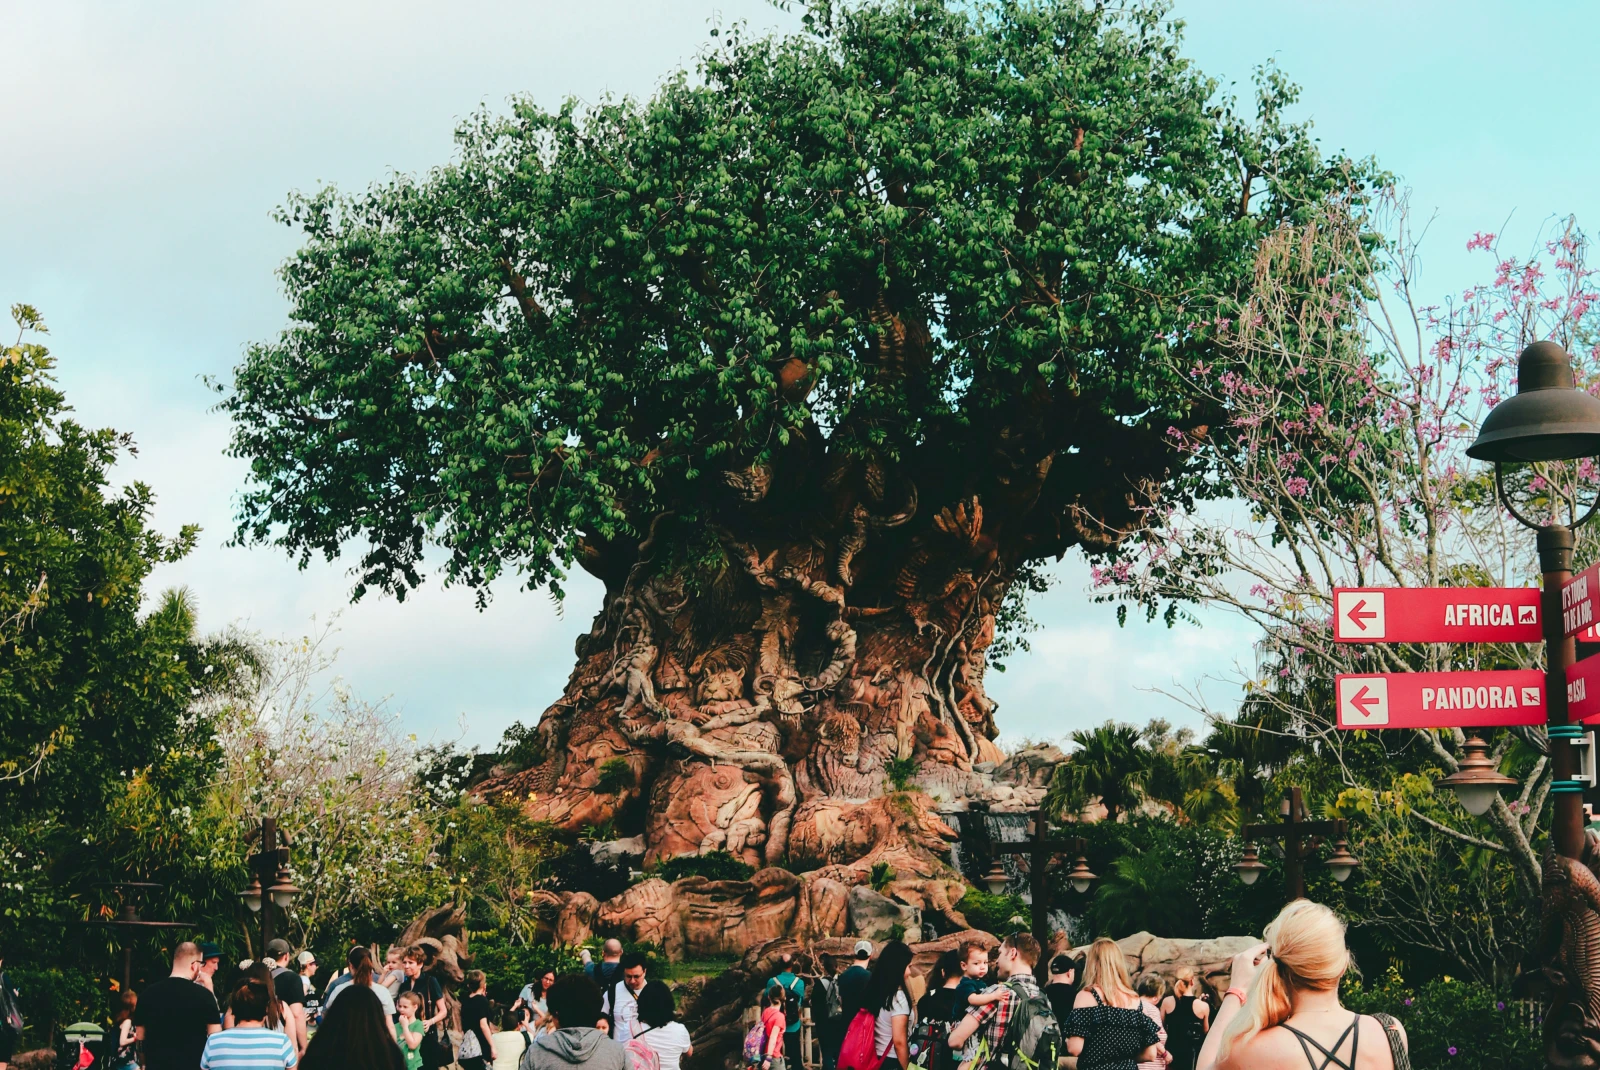 A tree in Animal Kingdom and people on the street waiting for rides. 